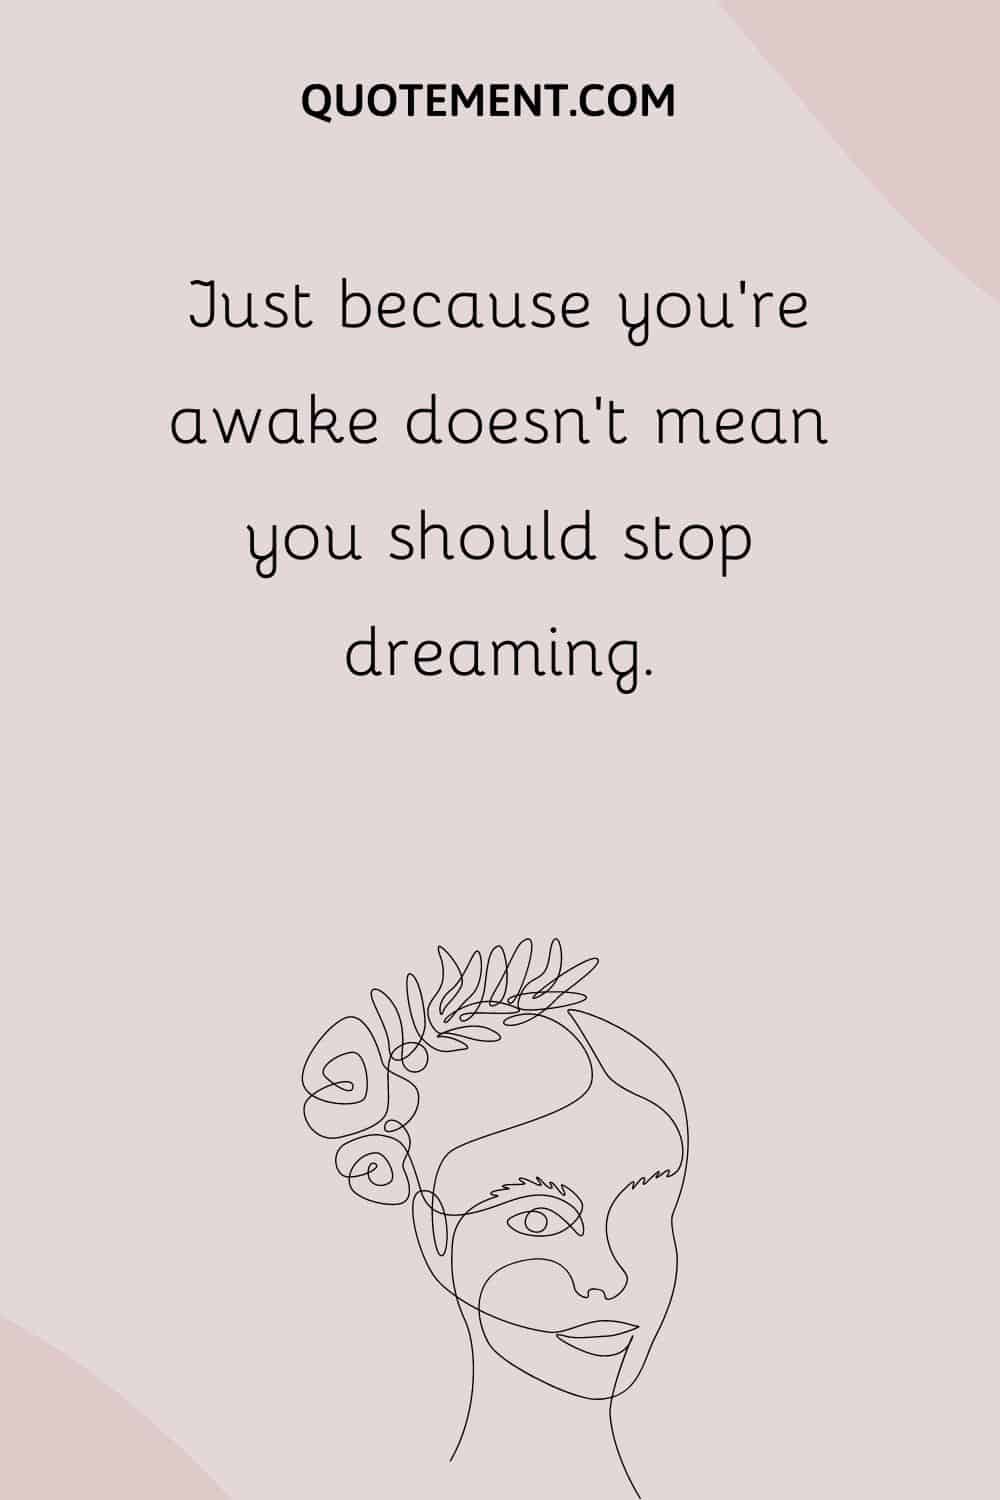 Just because you’re awake doesn’t mean you should stop dreaming.